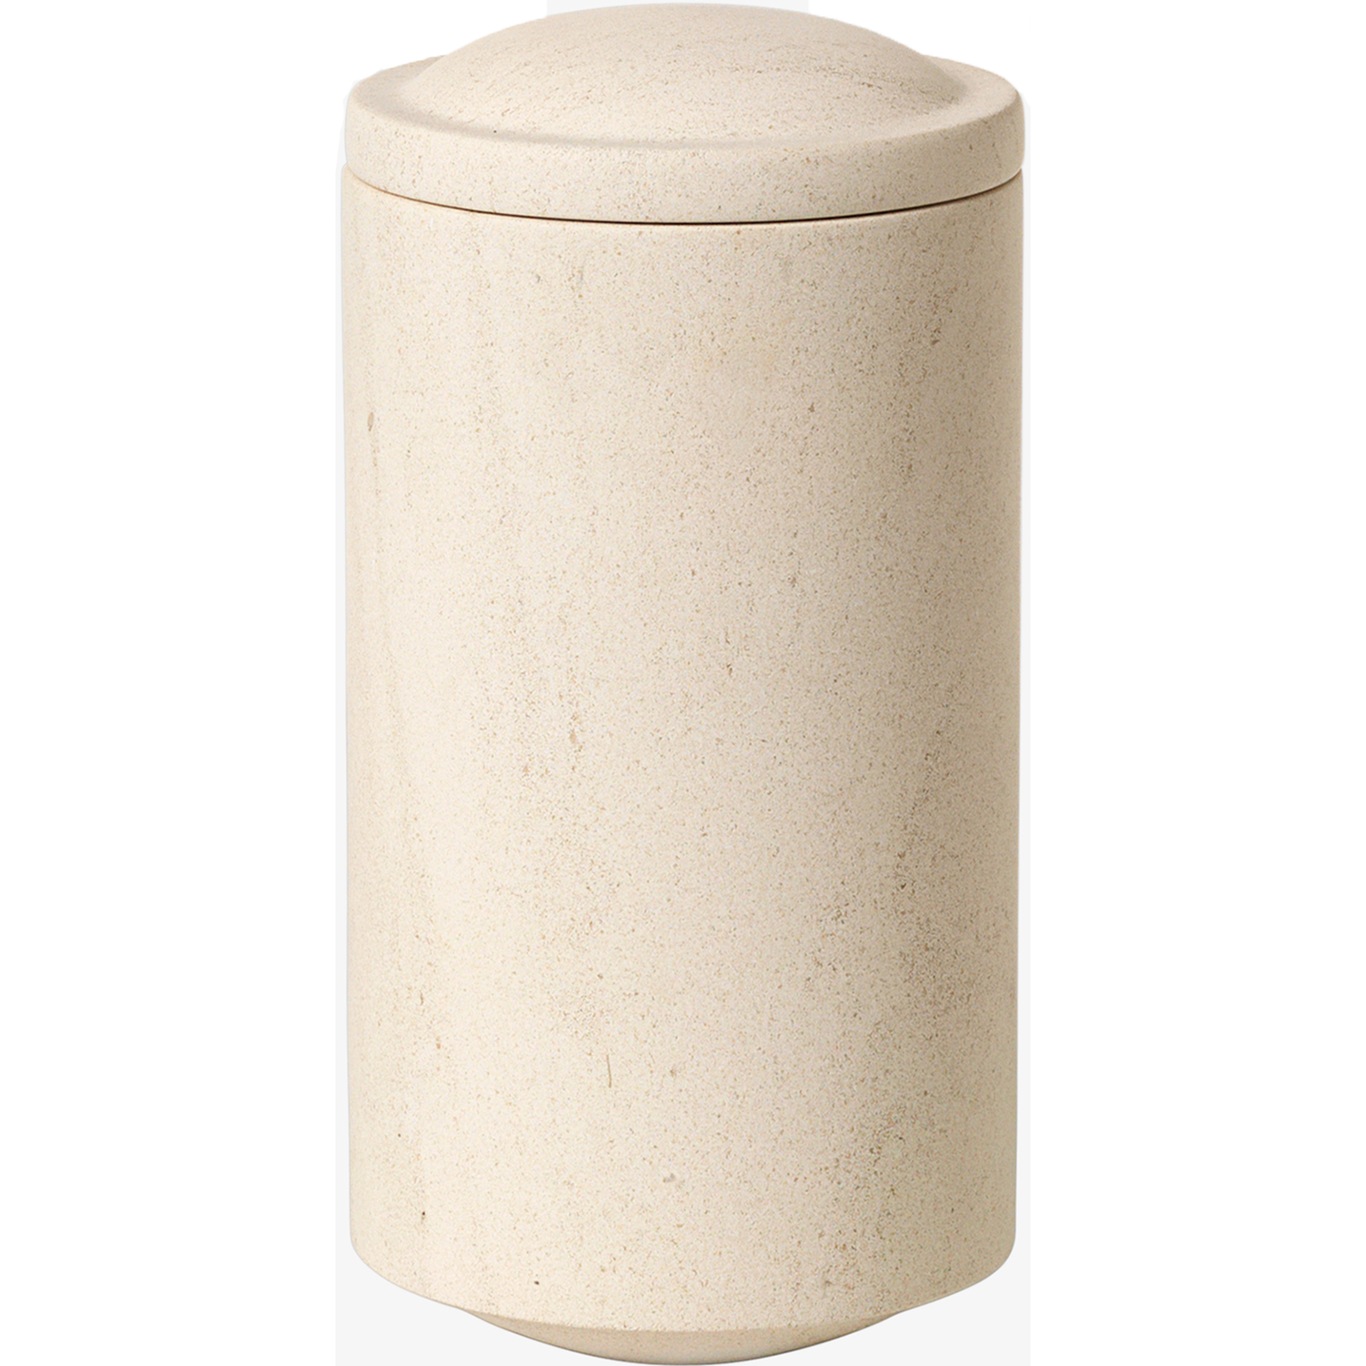 Gallery Objects 04 Jar 28 cm, Lime Stone